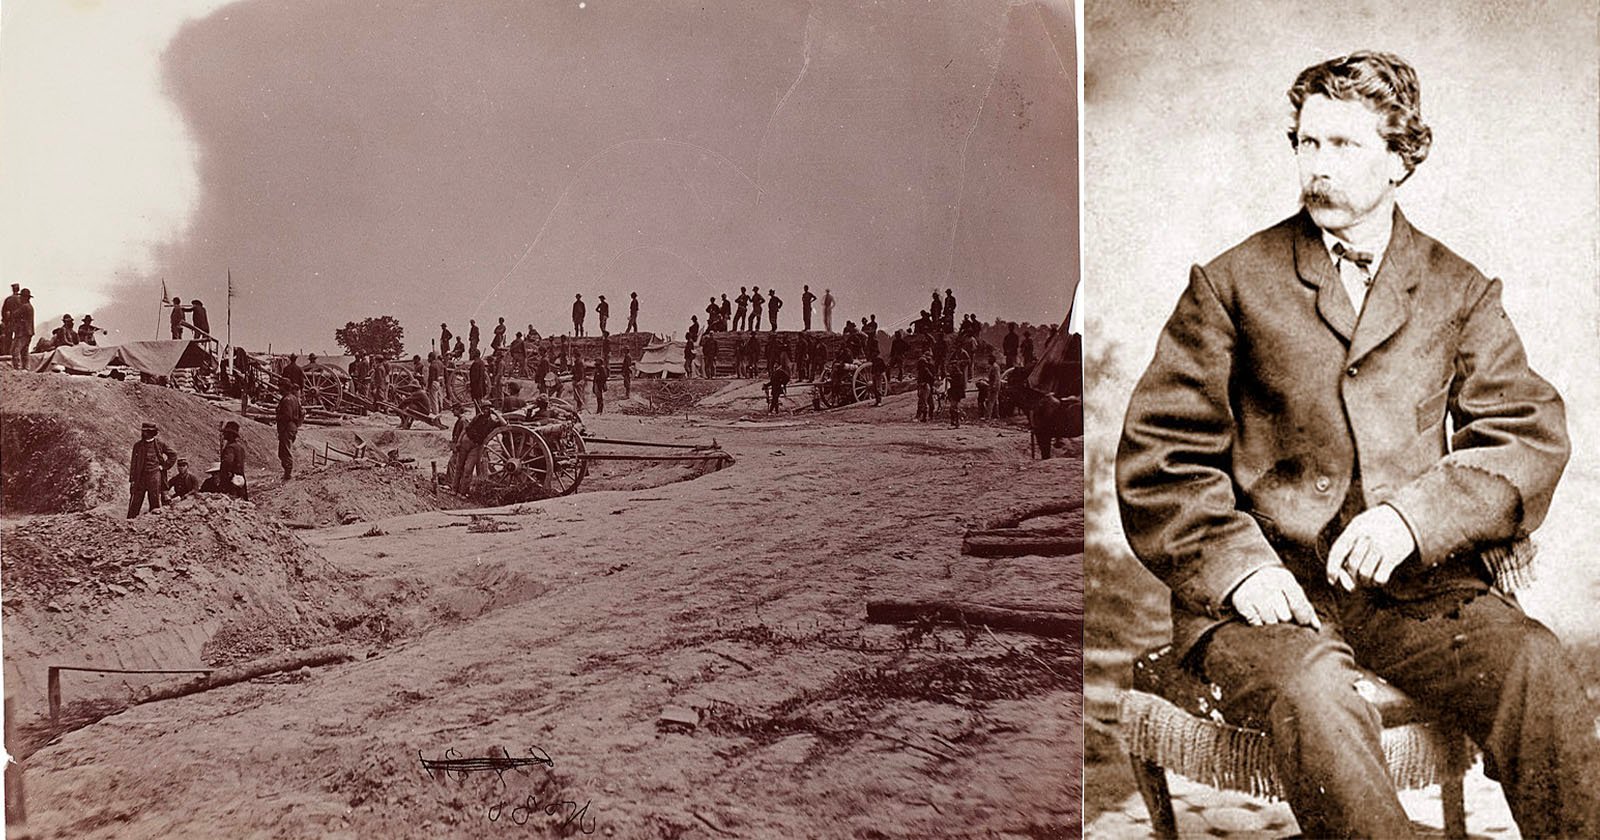 Shining a Light on Mystery Civil War Photographer Who Took Gruesome Images